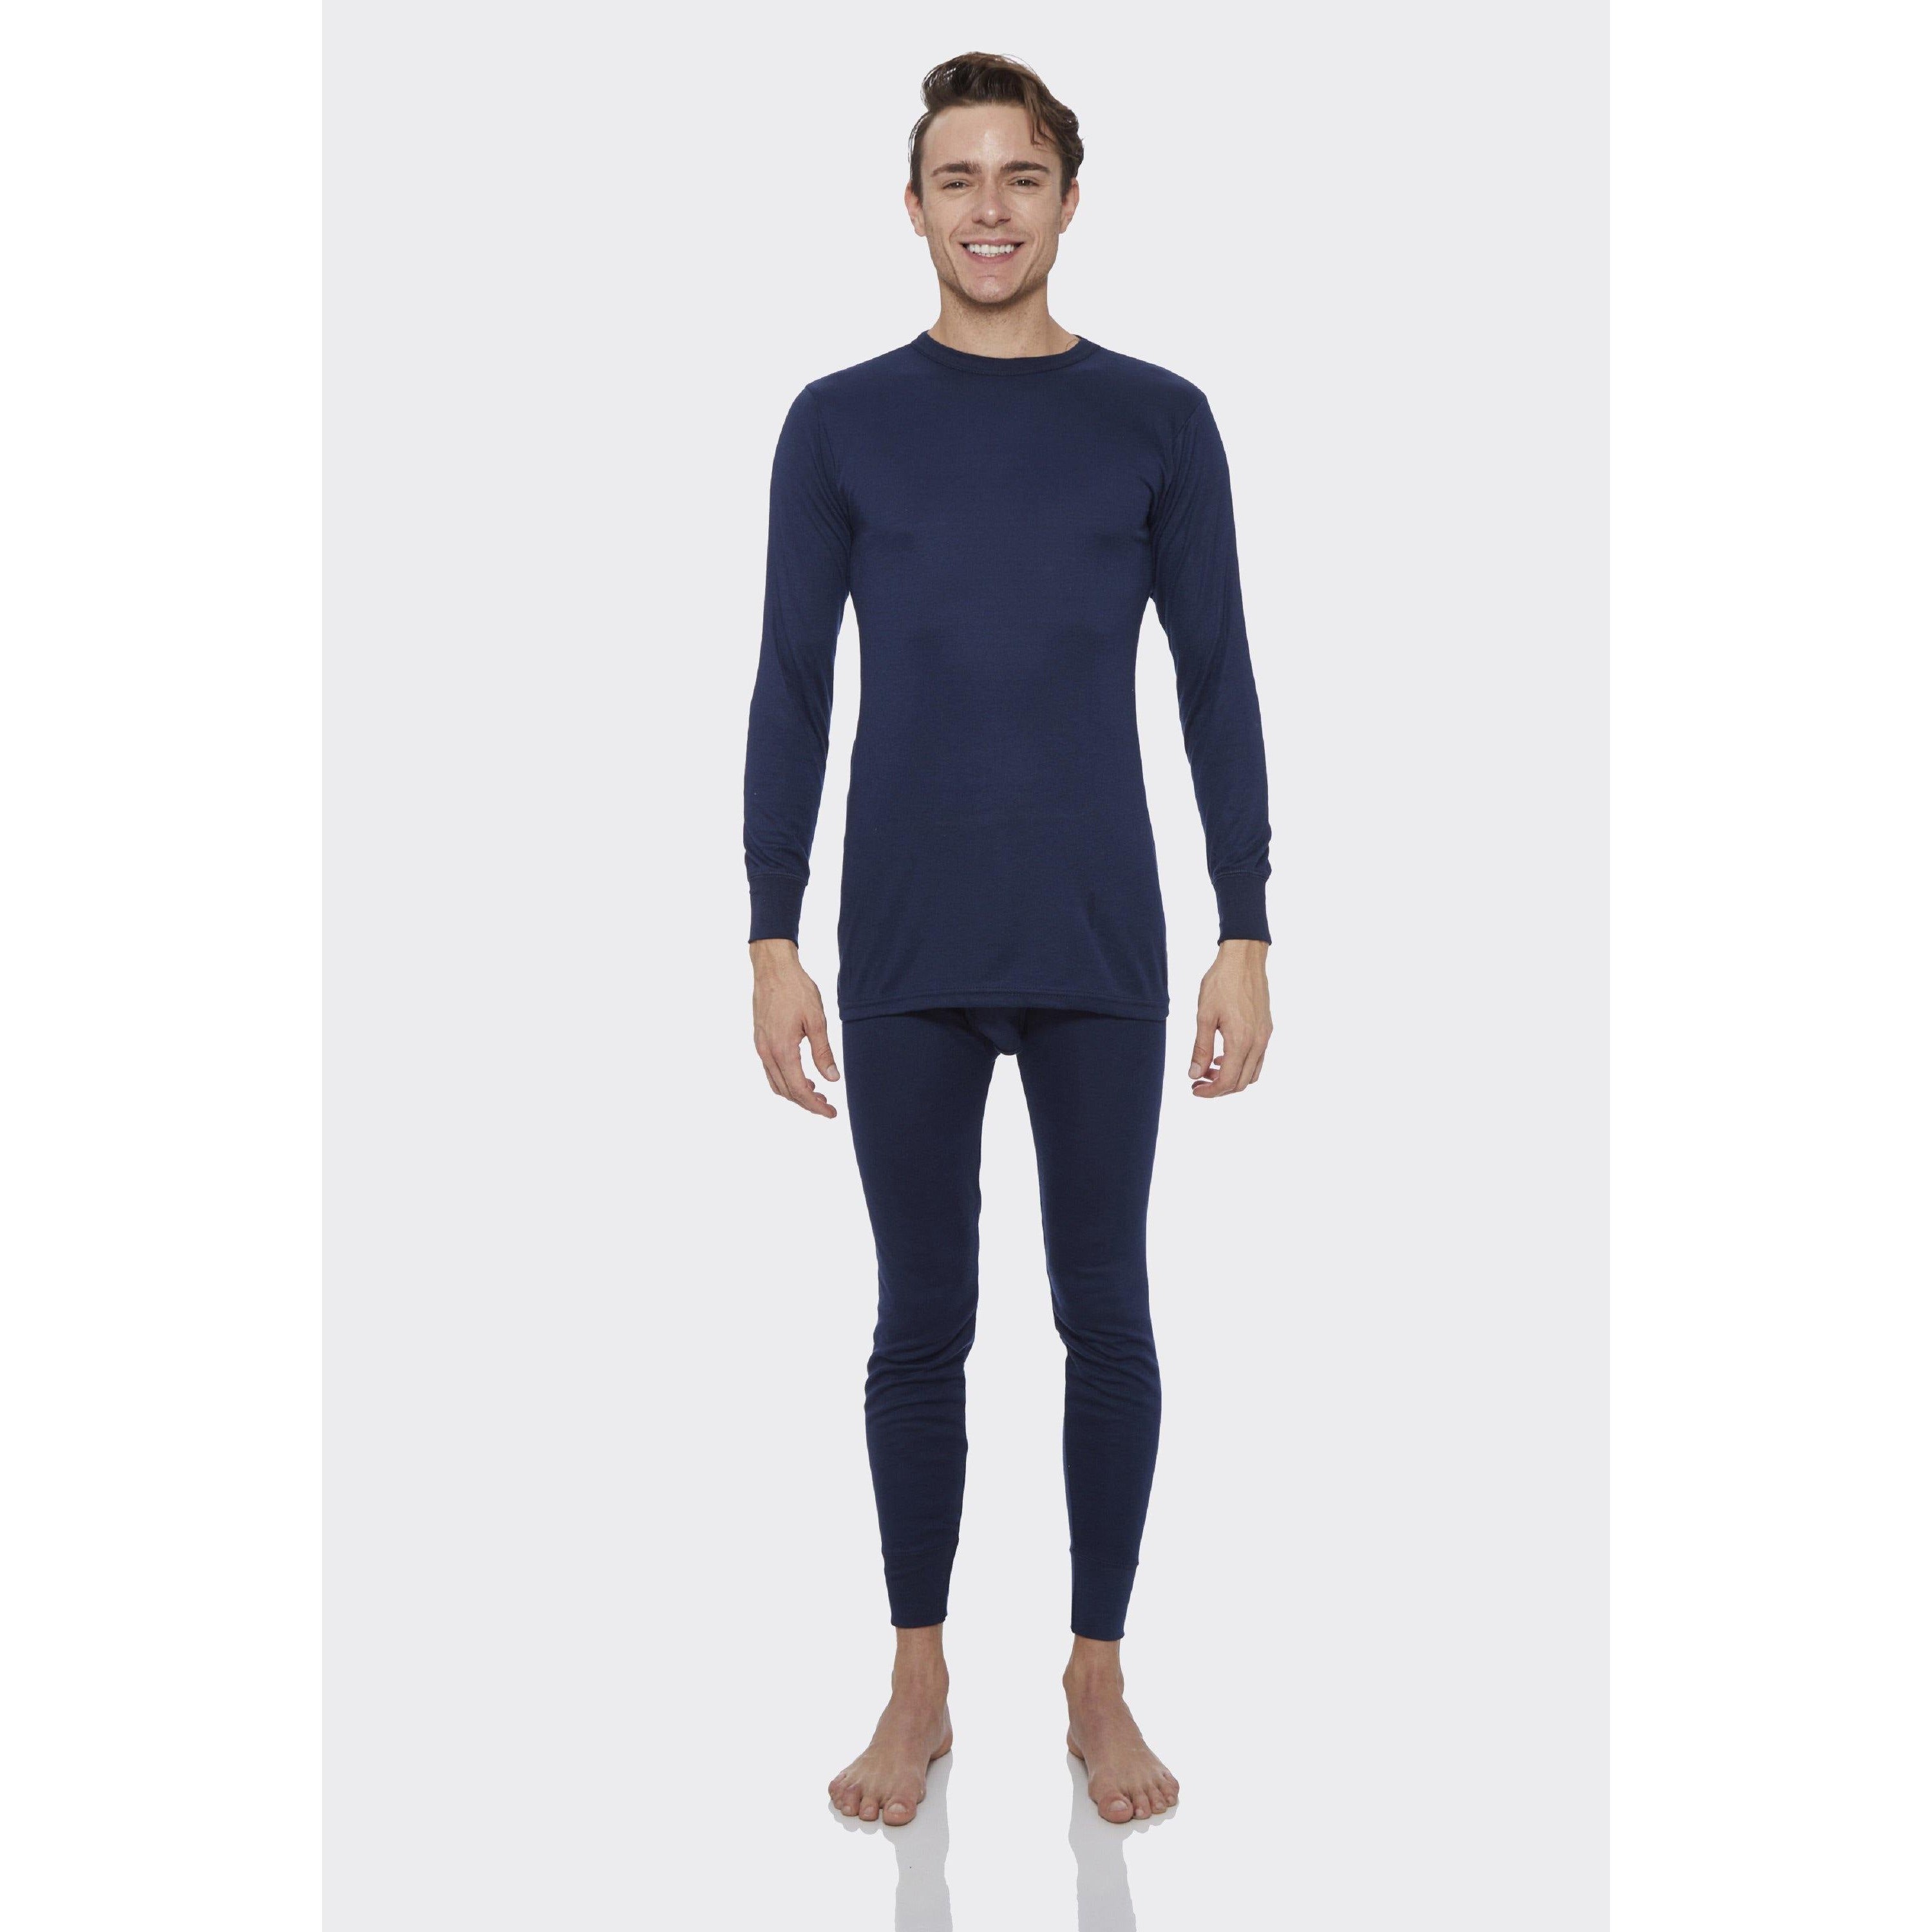 Rocky Thermal Underwear for Men (Thermal Long Johns Set) Shirt